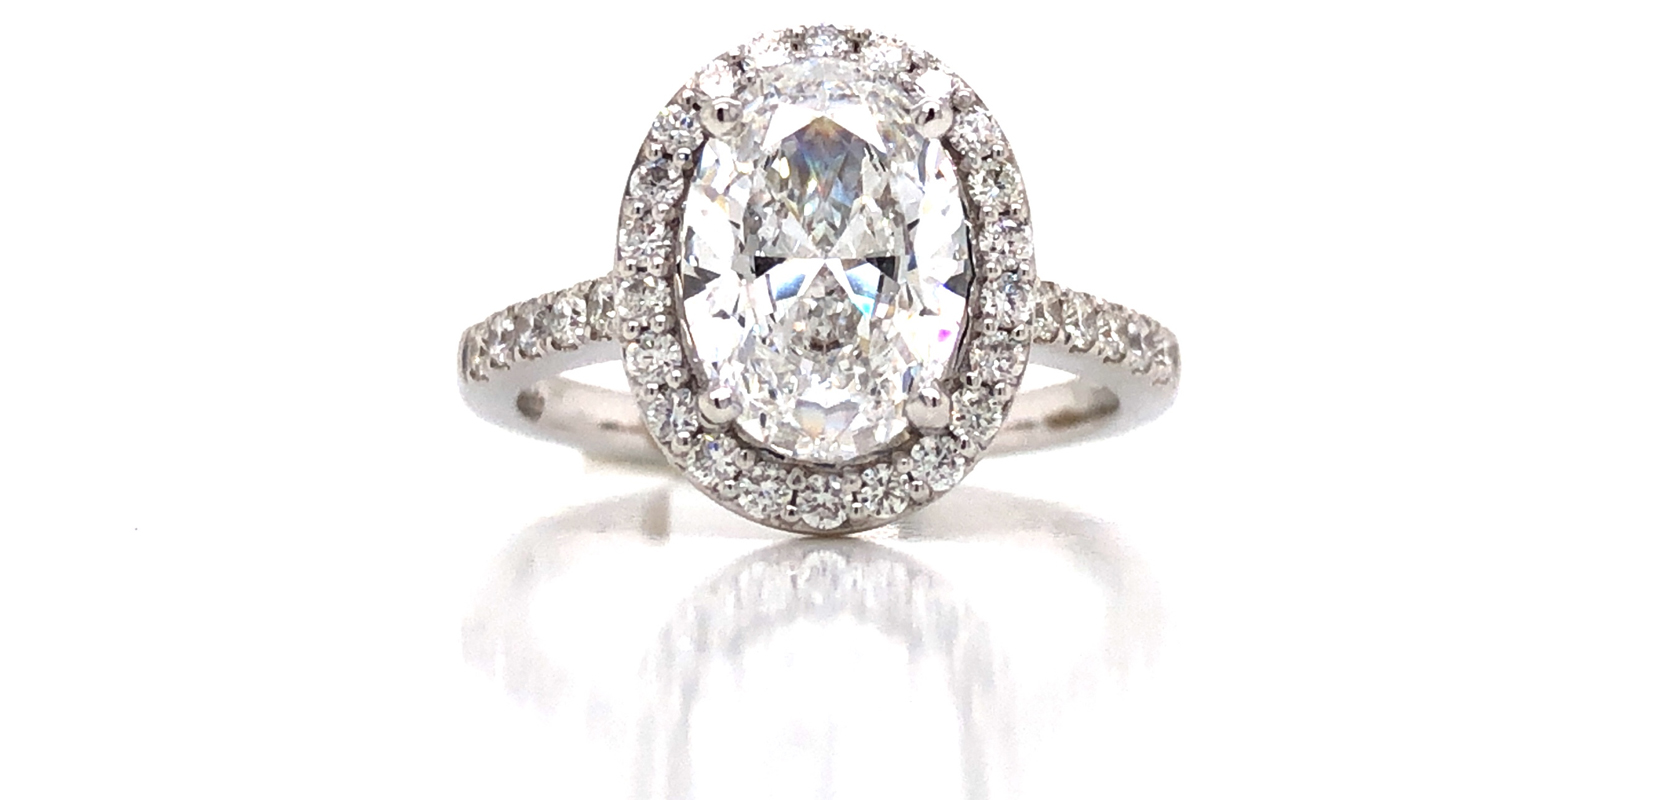 3 Reasons You Shouldn’t Buy a Mass Produced Engagement Ring